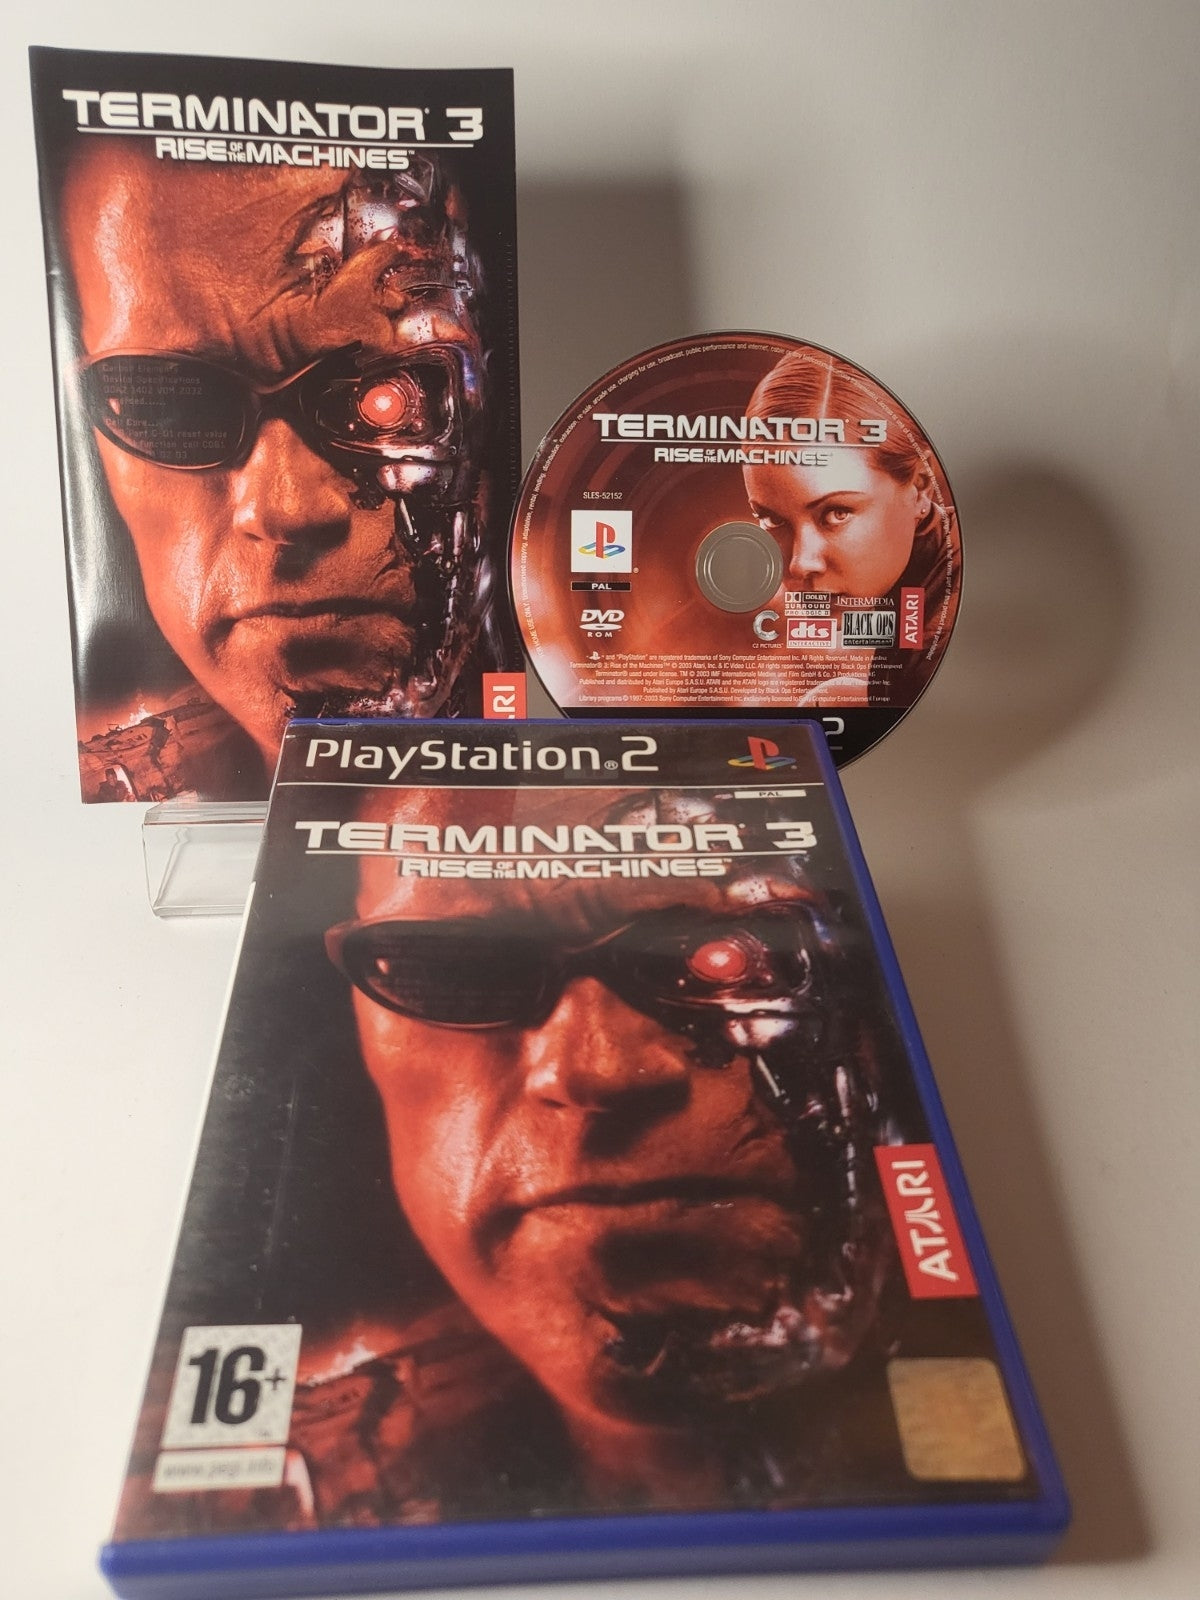 Terminator 3 Rise of the Machines Playstation 2